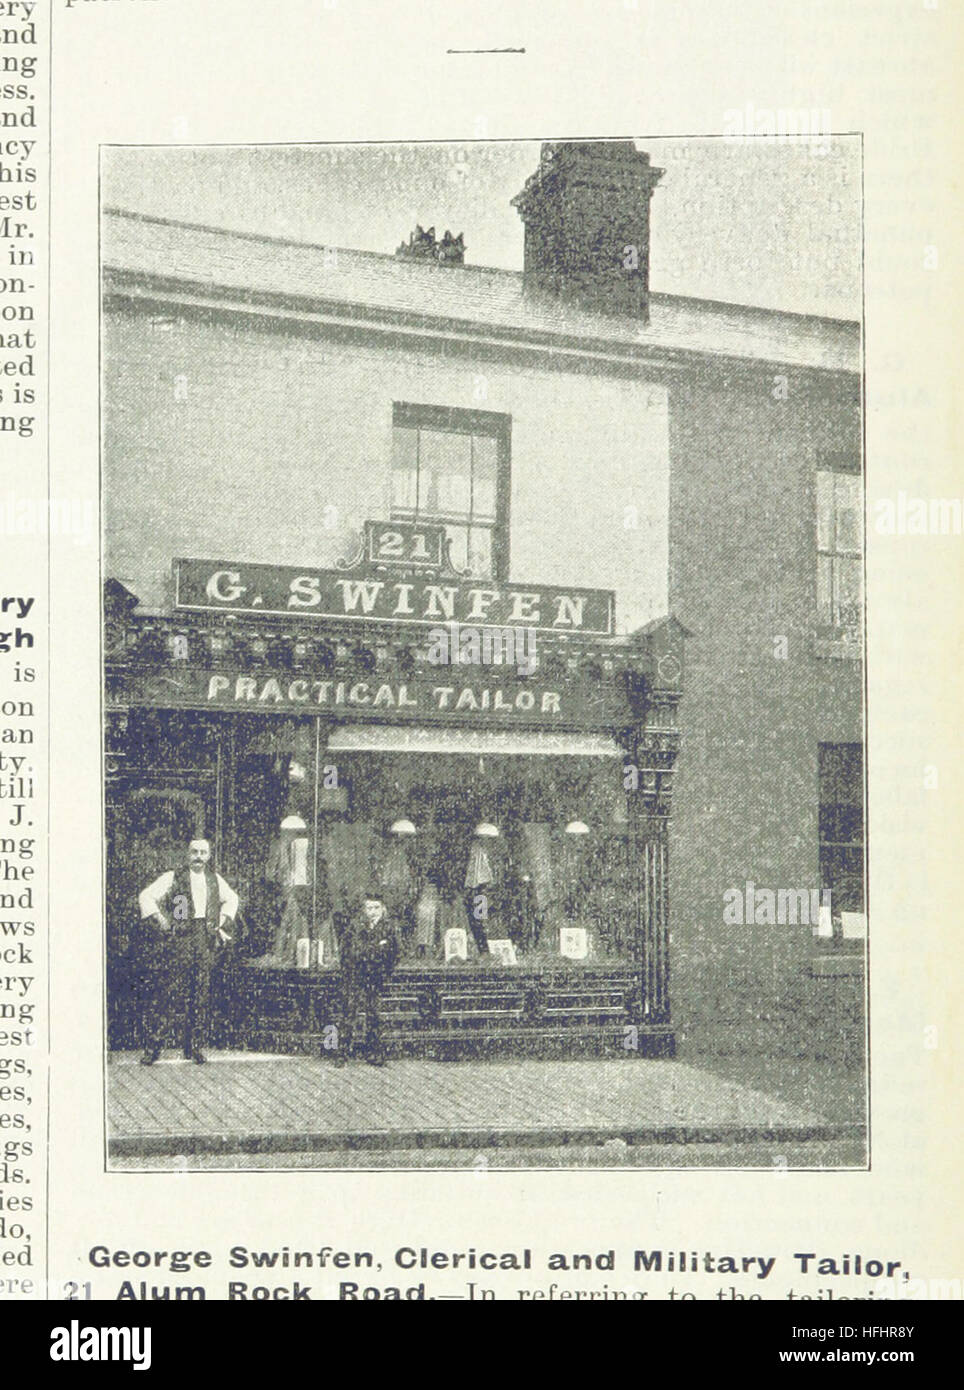 Image taken from page 18 of 'Illustrated Midland Business Review and View Album. Special edition for the district of East Birmingham, with part of Aston, etc' Image taken from page 18 of 'Illustrated Midland Business Review Stock Photo